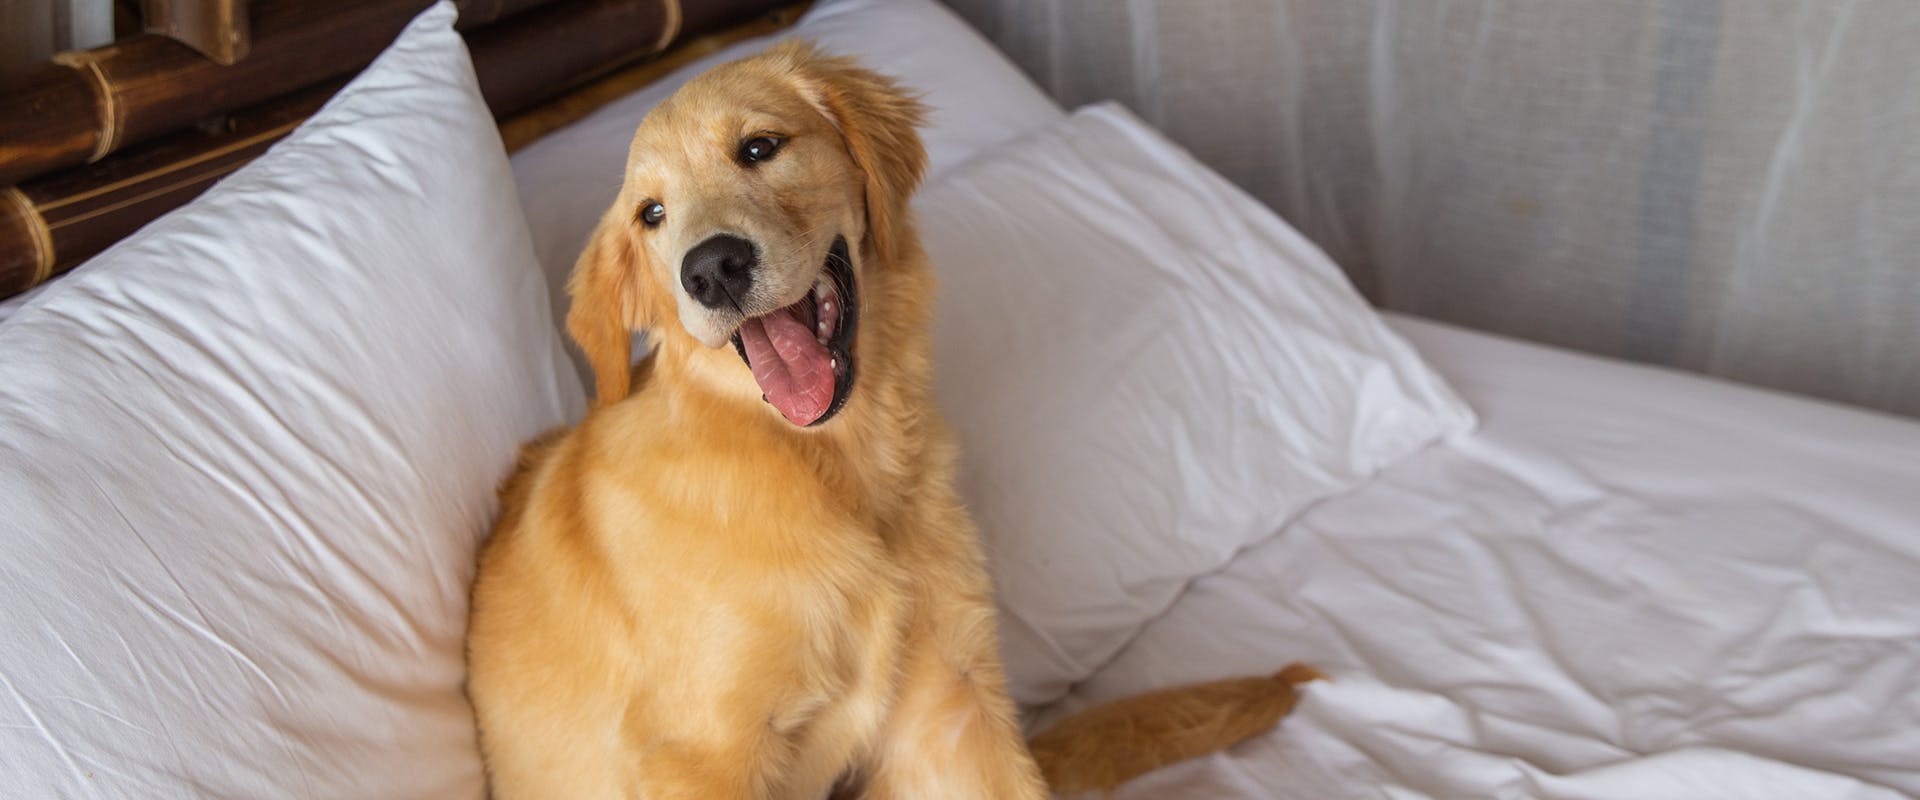 A happy Golden Retriever puppy sitting in an unmade bed